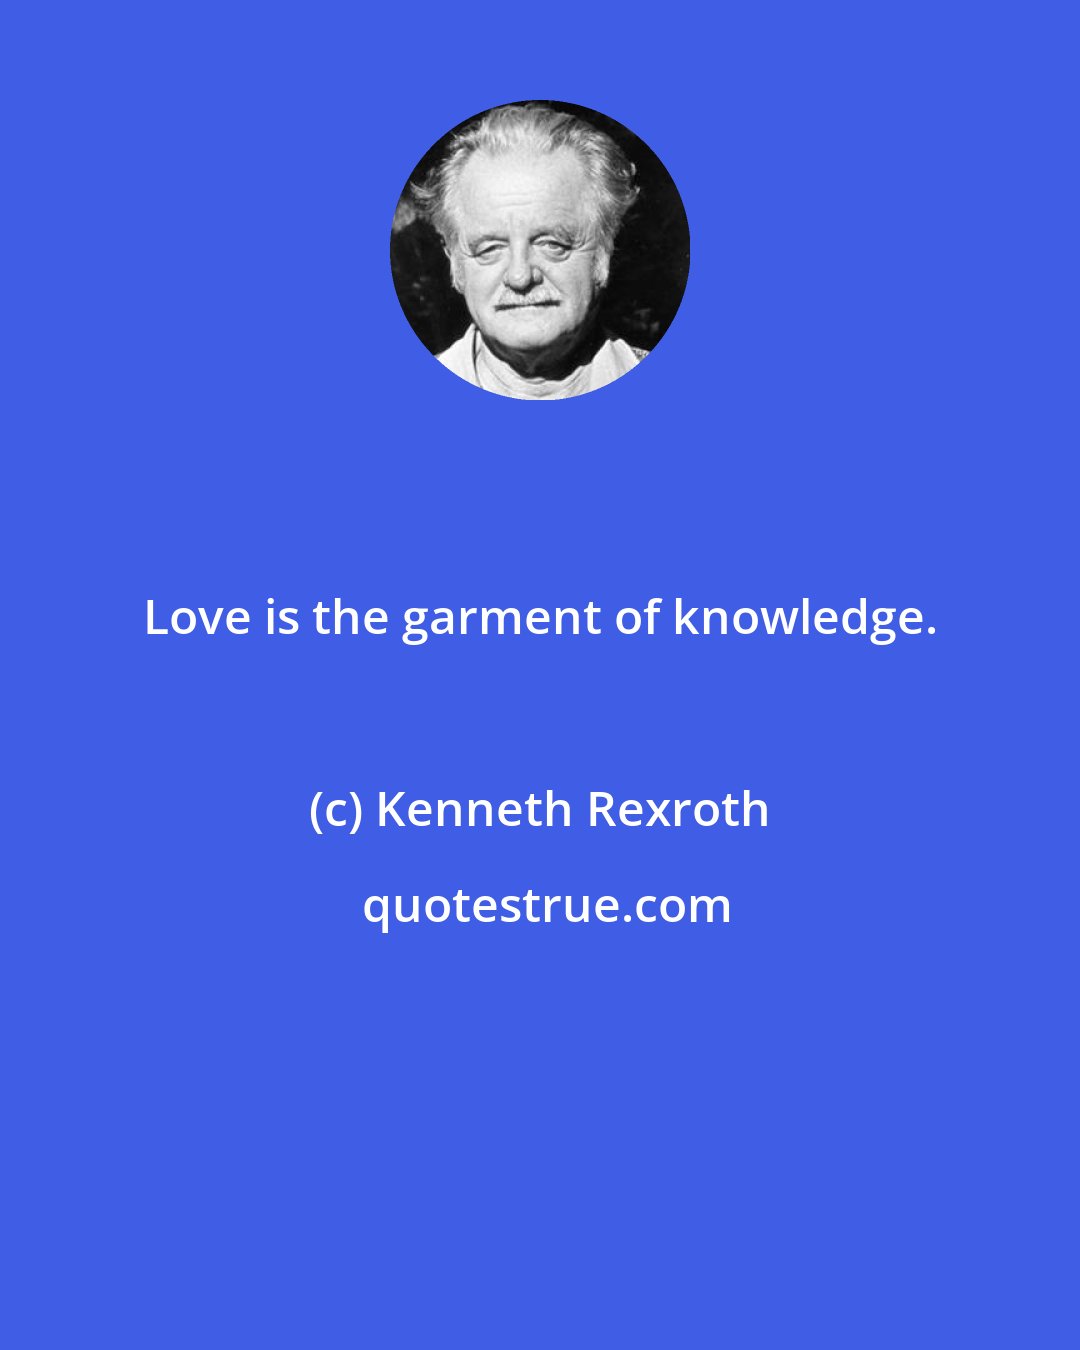 Kenneth Rexroth: Love is the garment of knowledge.